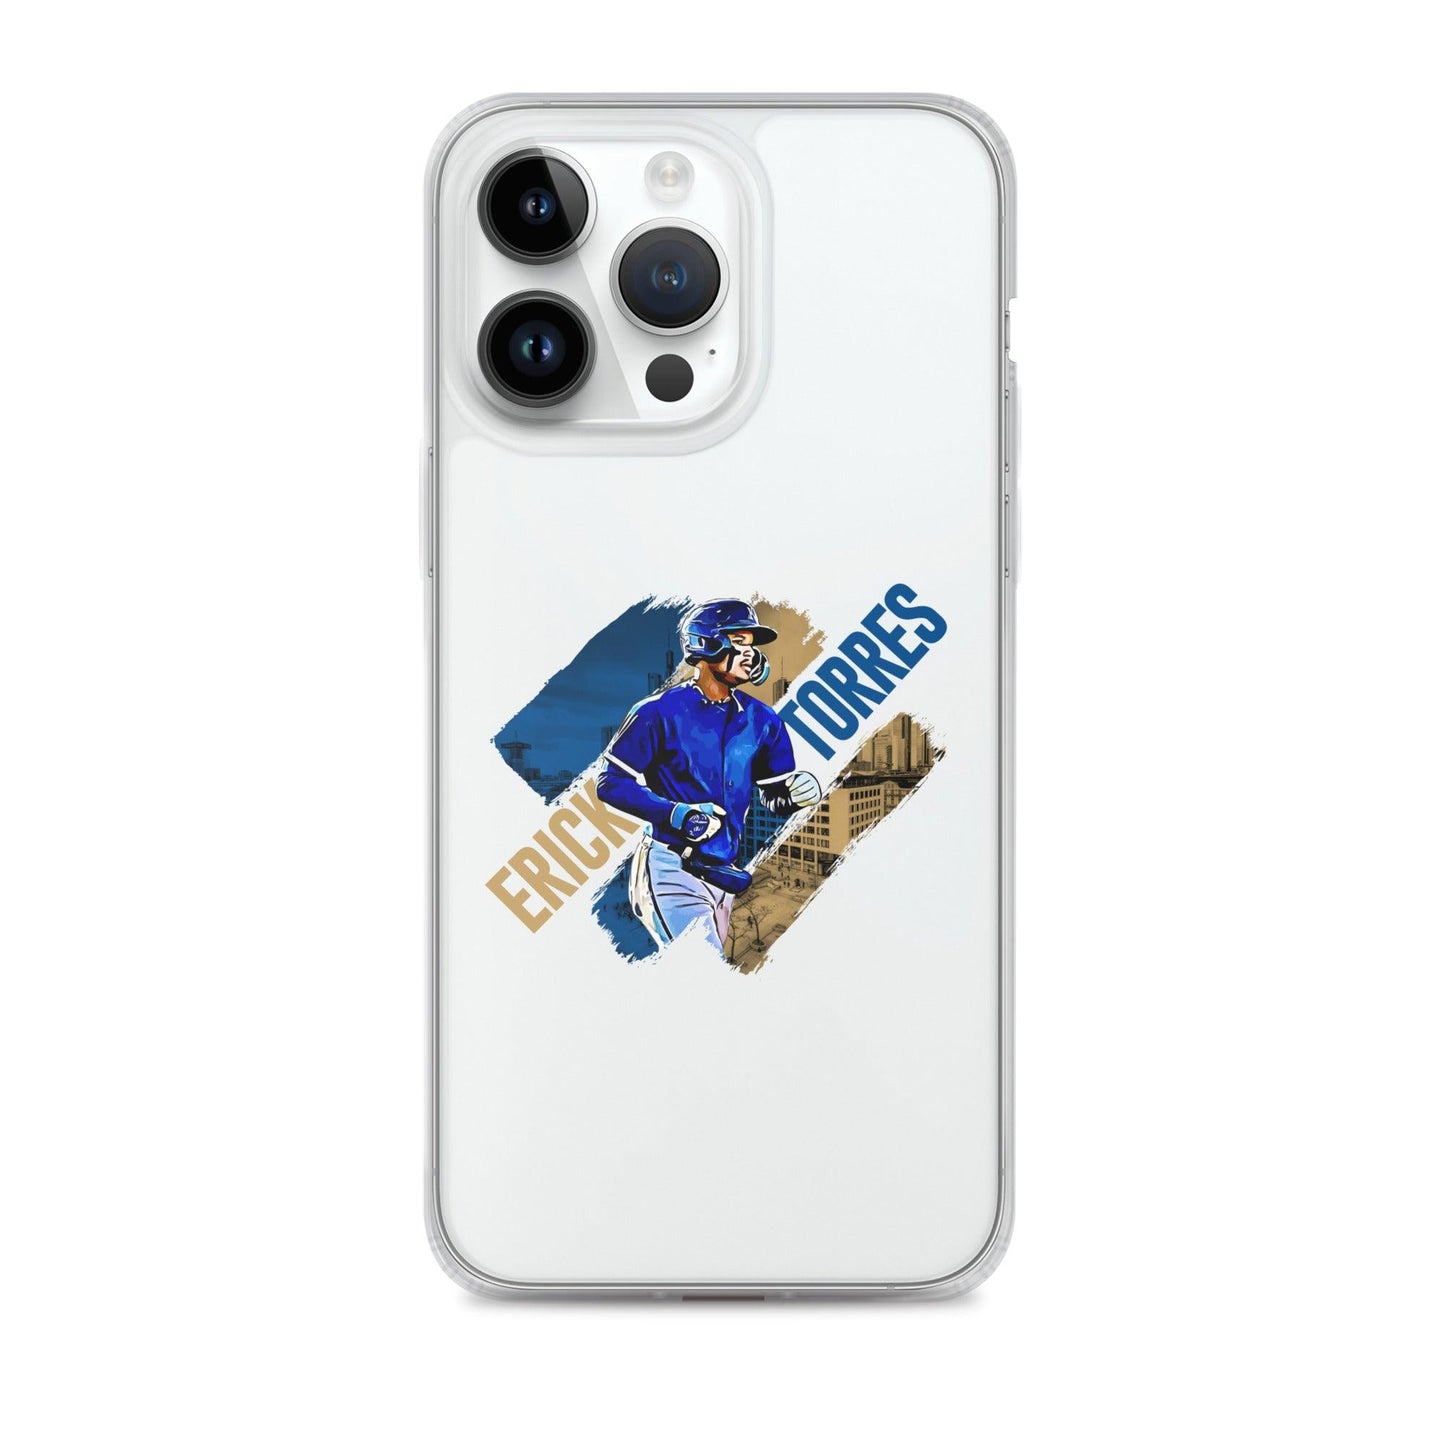 Erick Torres "Gameday" iPhone® - Fan Arch